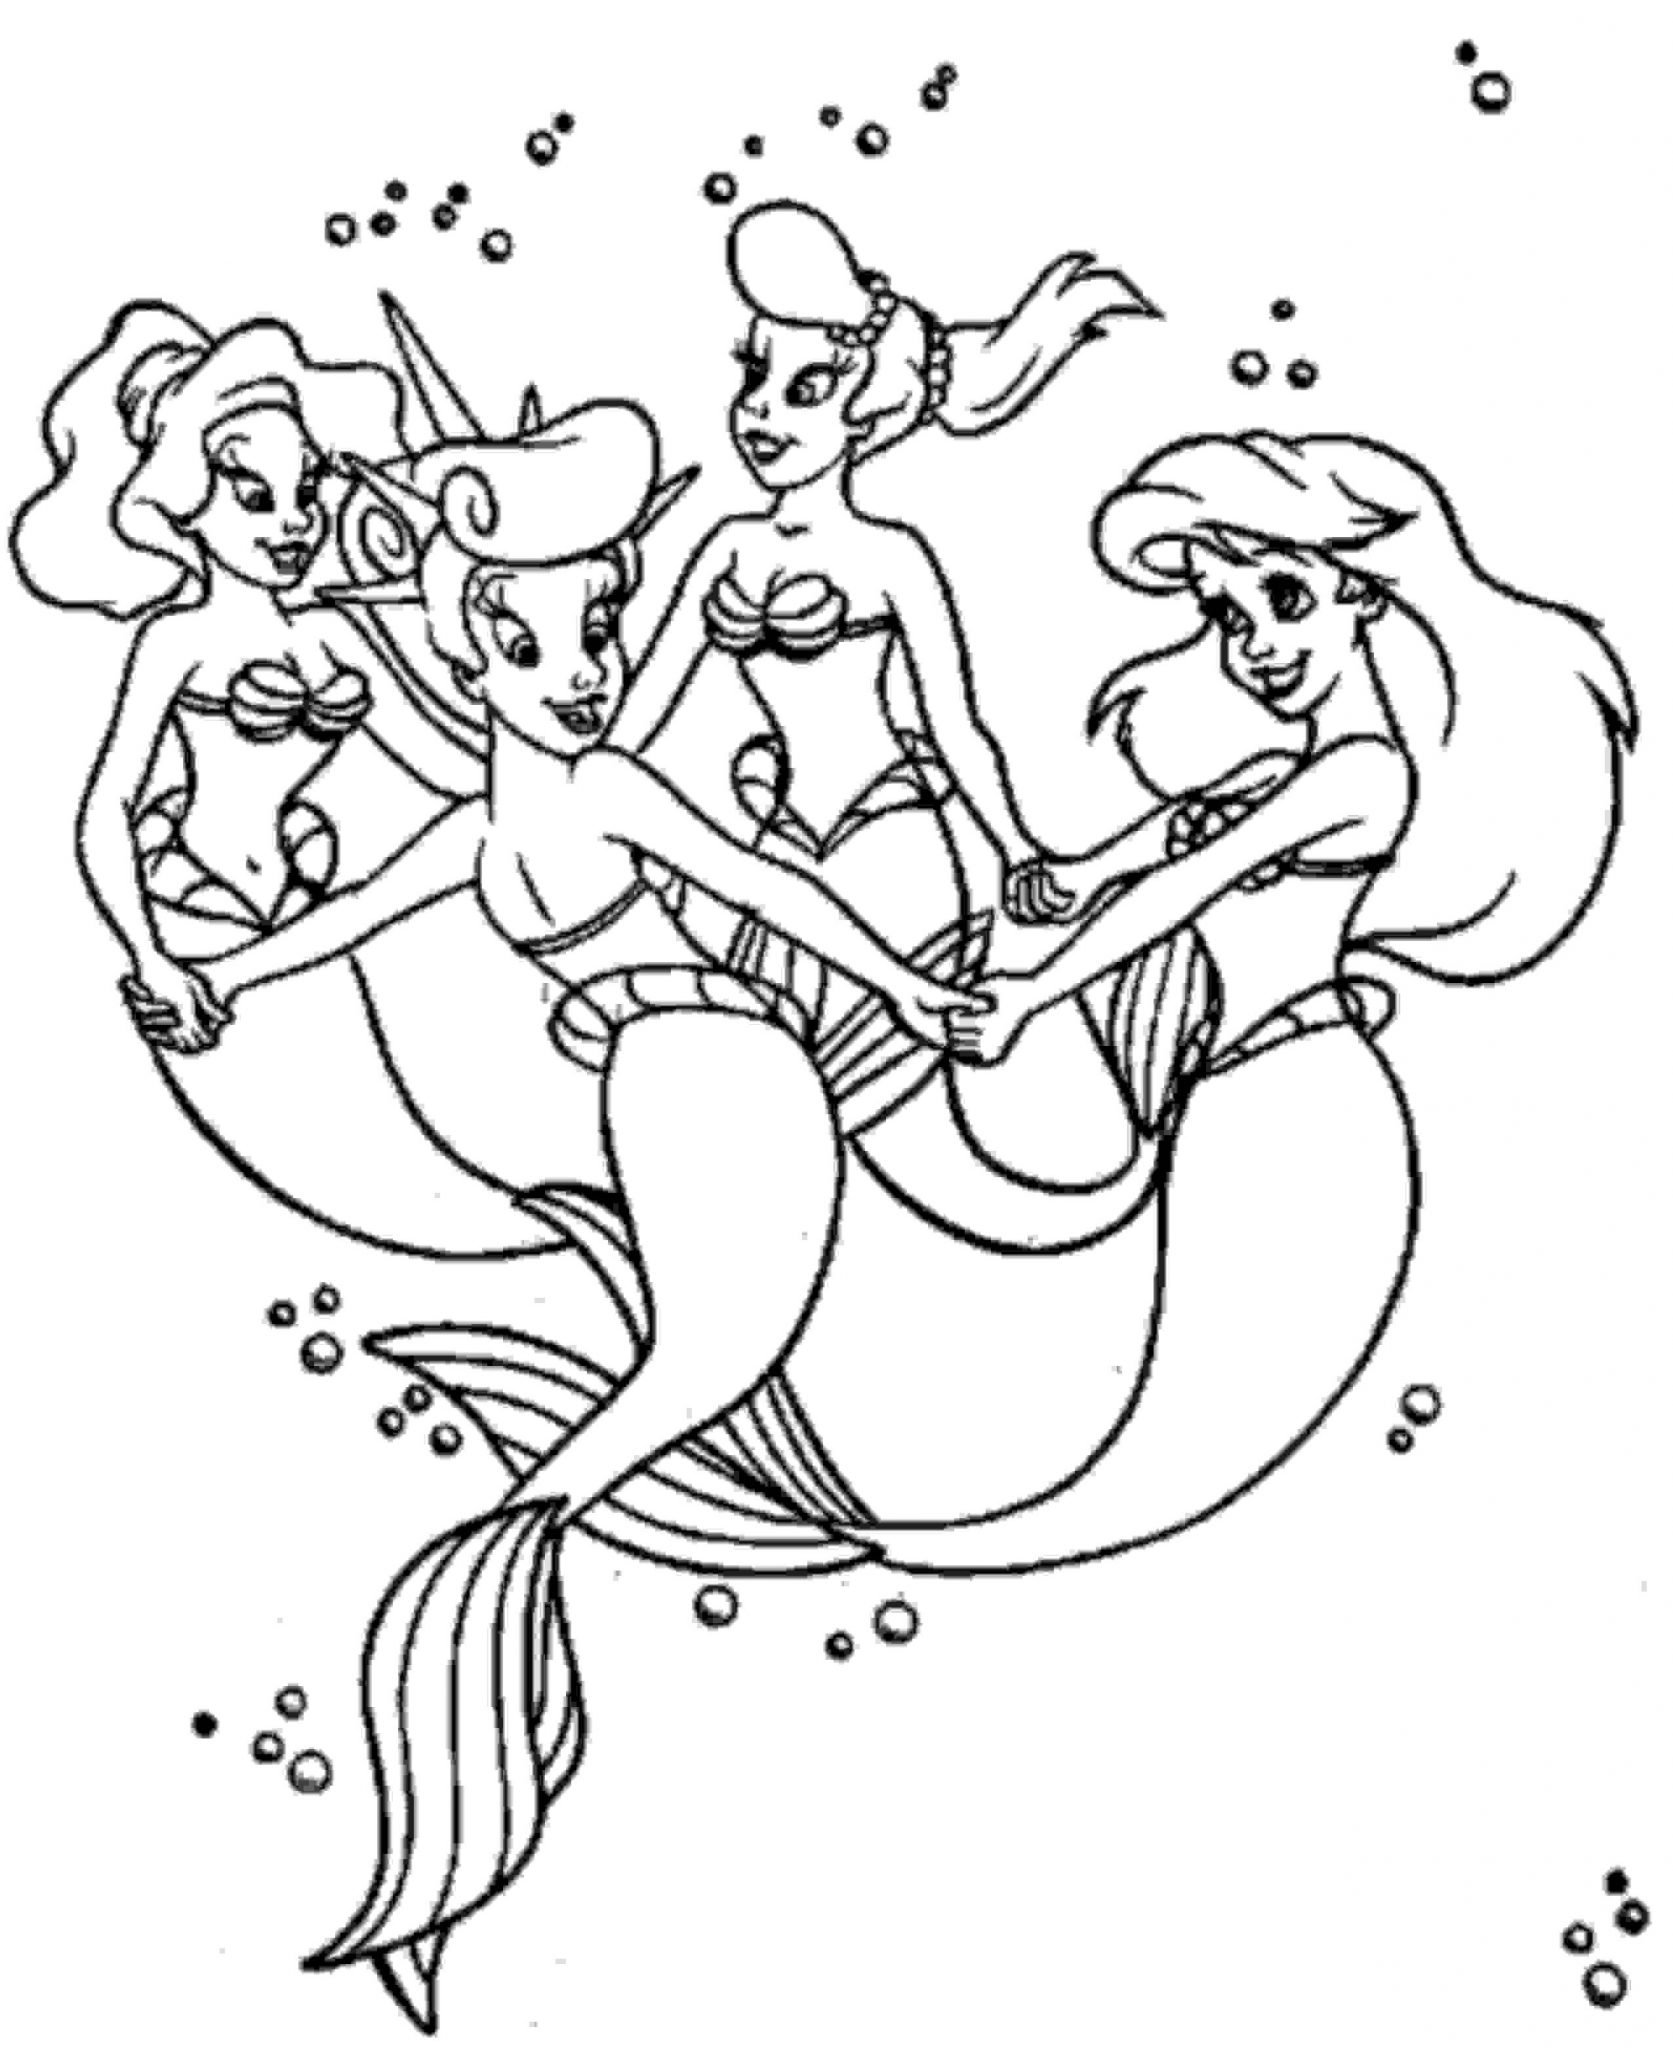 Download Print & Download - Find the Suitable Little Mermaid Coloring Pages for the Kids